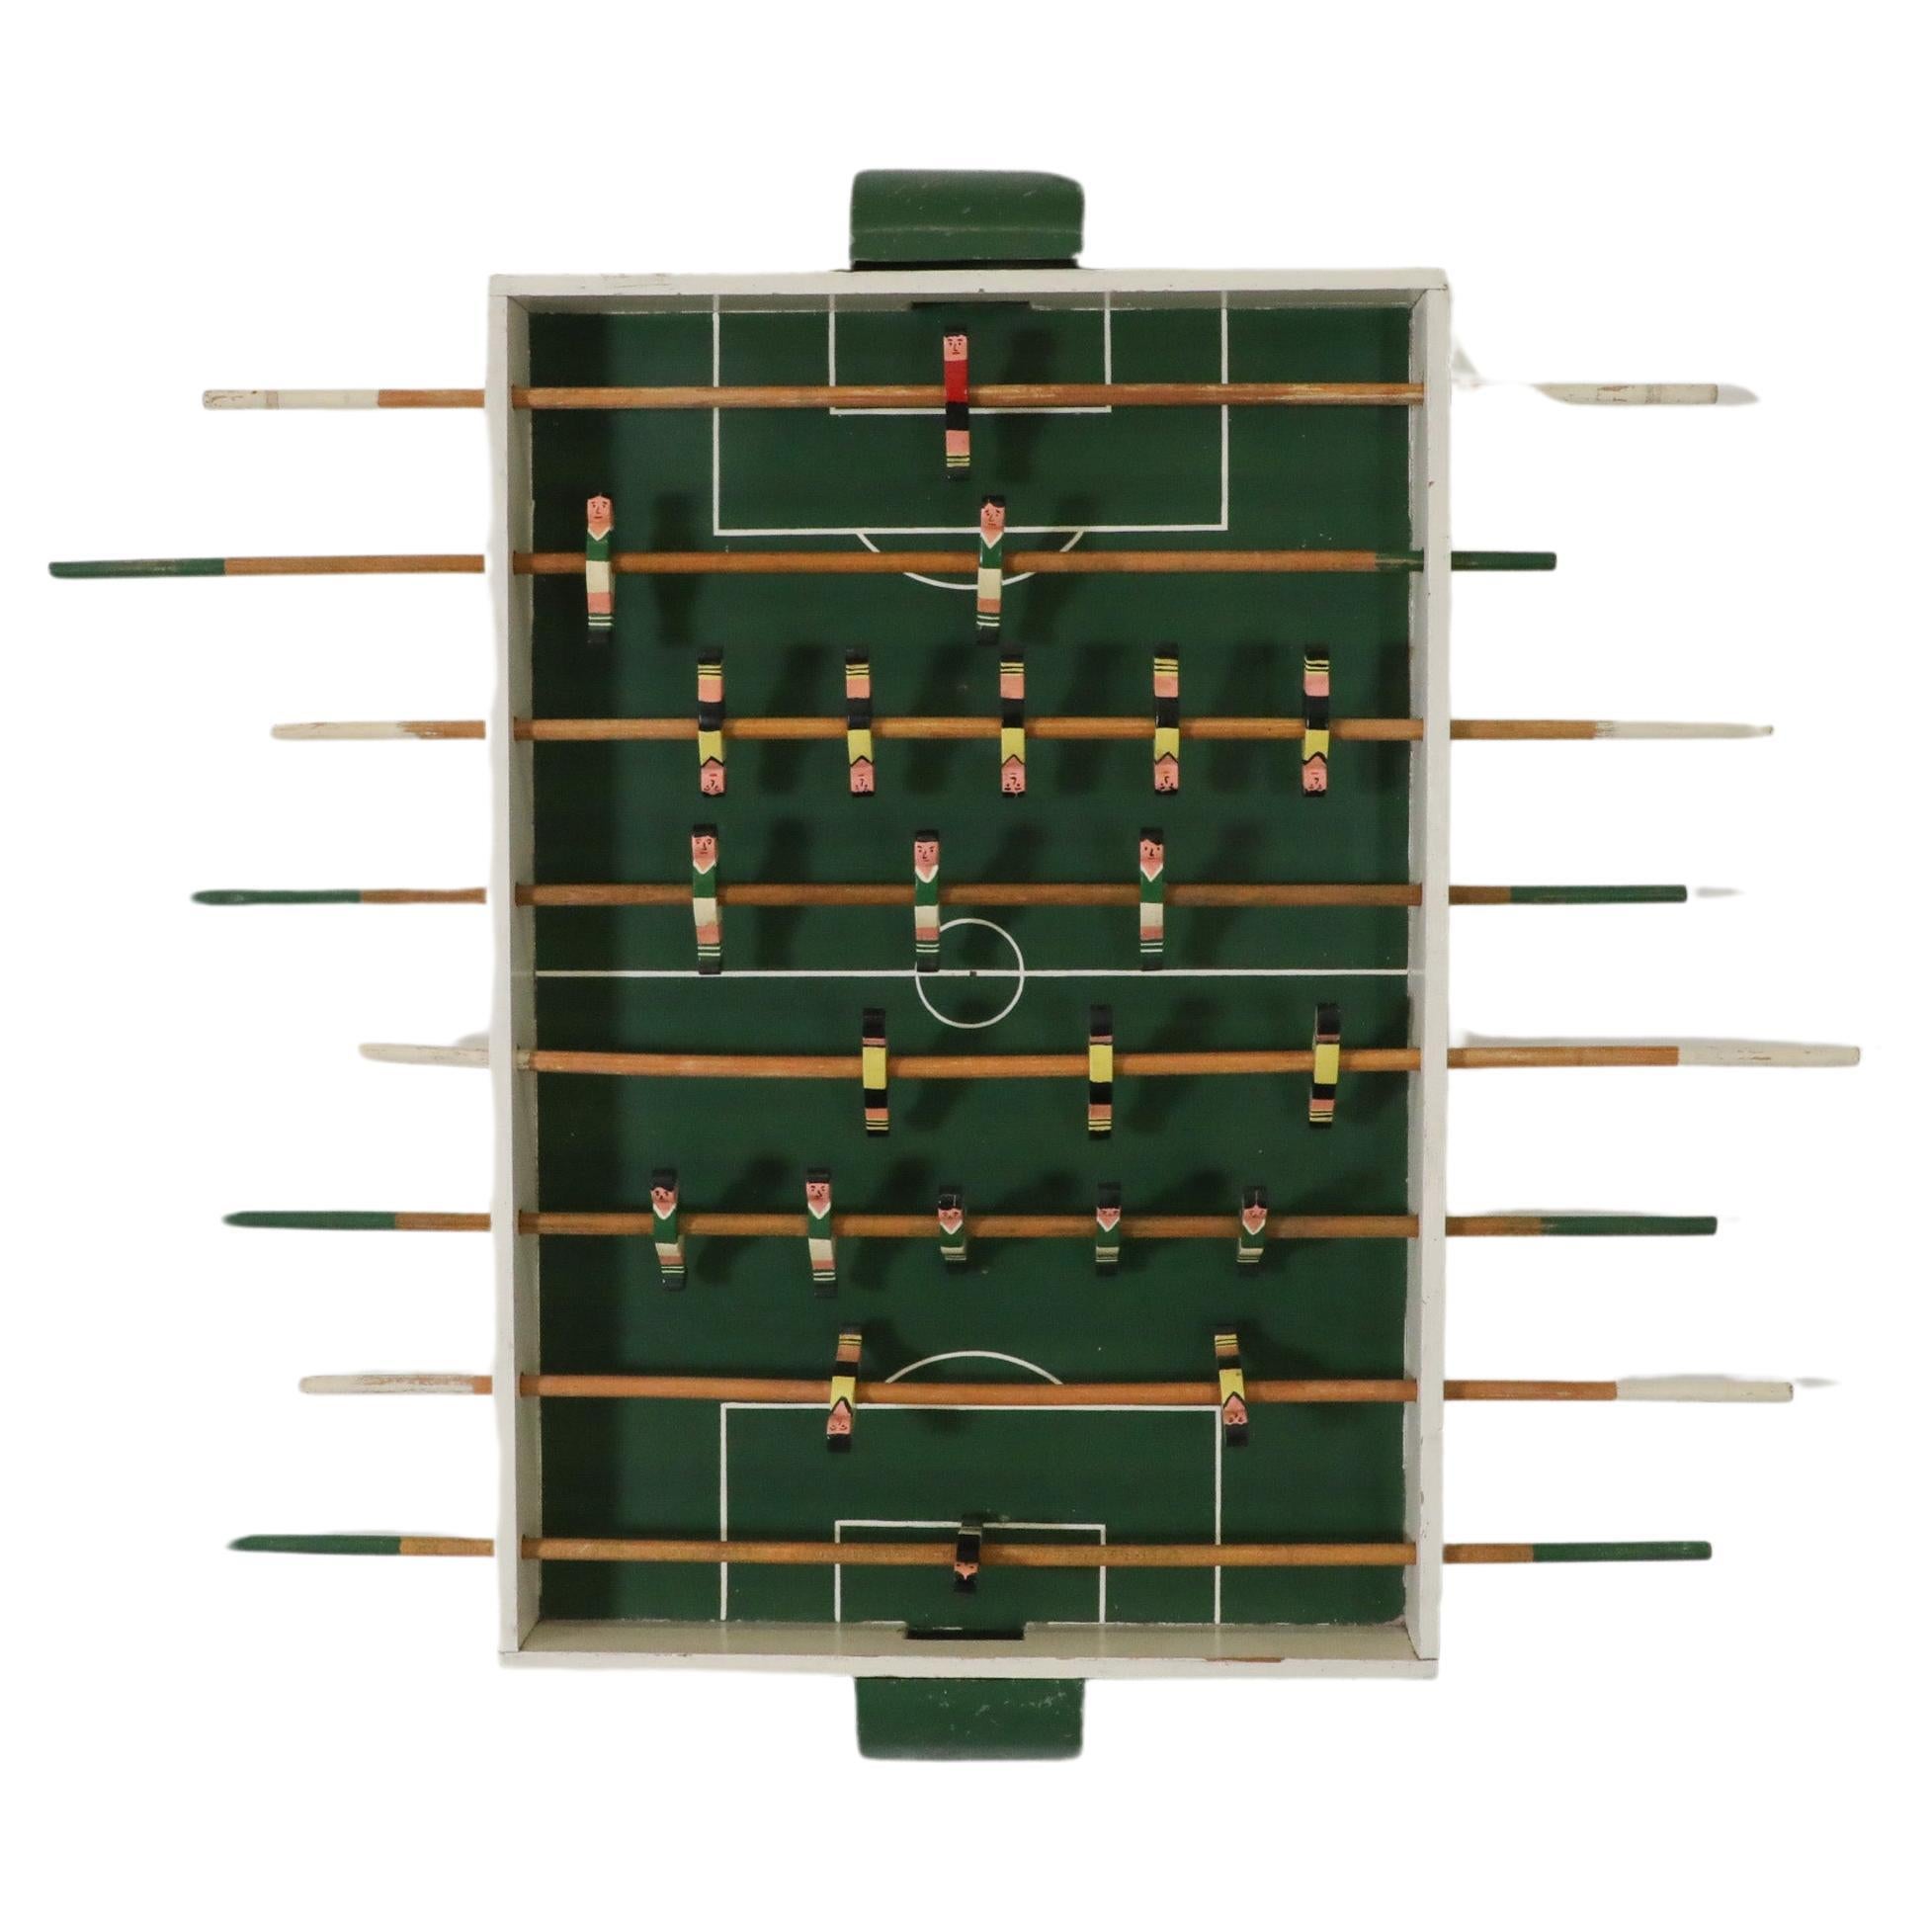 Vintage Mid-Century Hand Painted Foosball Table w/ 8 Rows of Rods & 22 Players